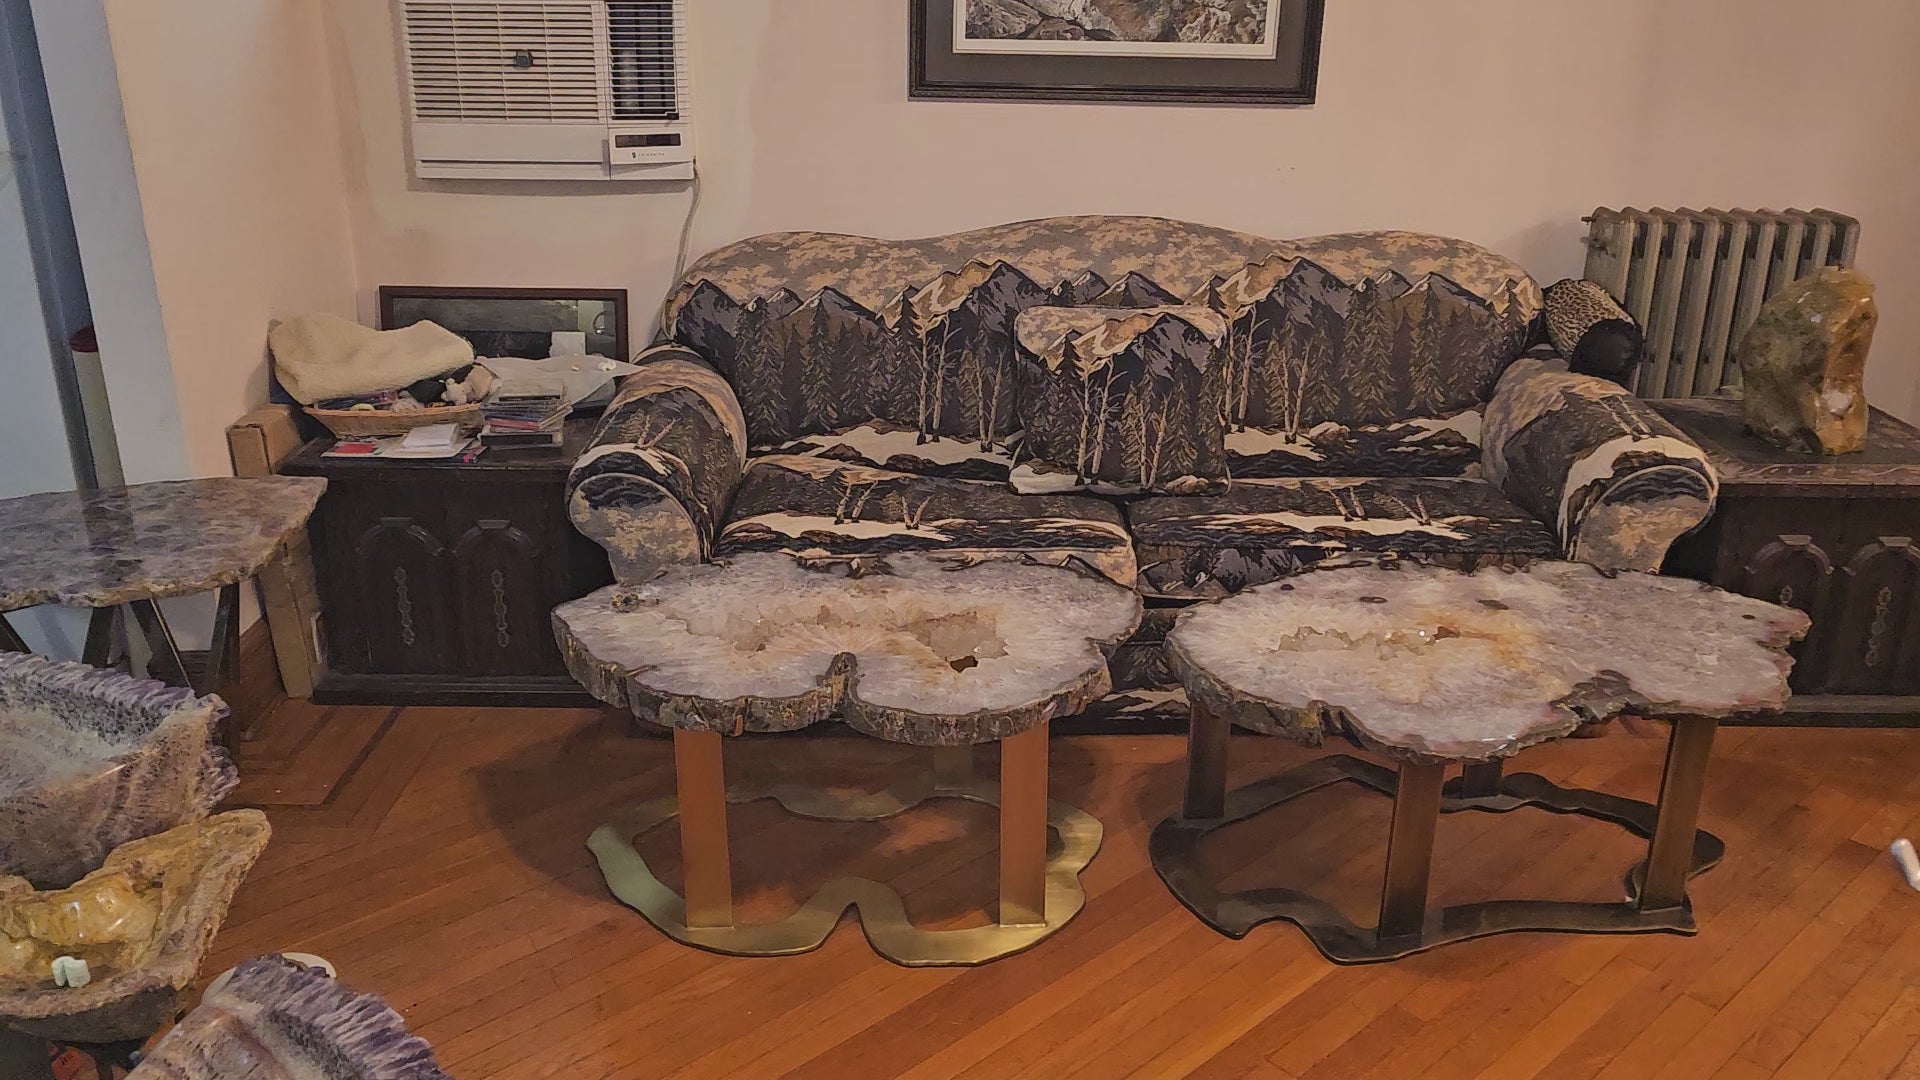 Giant Center Cut Agate Geode slab table #137 "Crisantemo" with custom brass base (45" x 26" x 19")